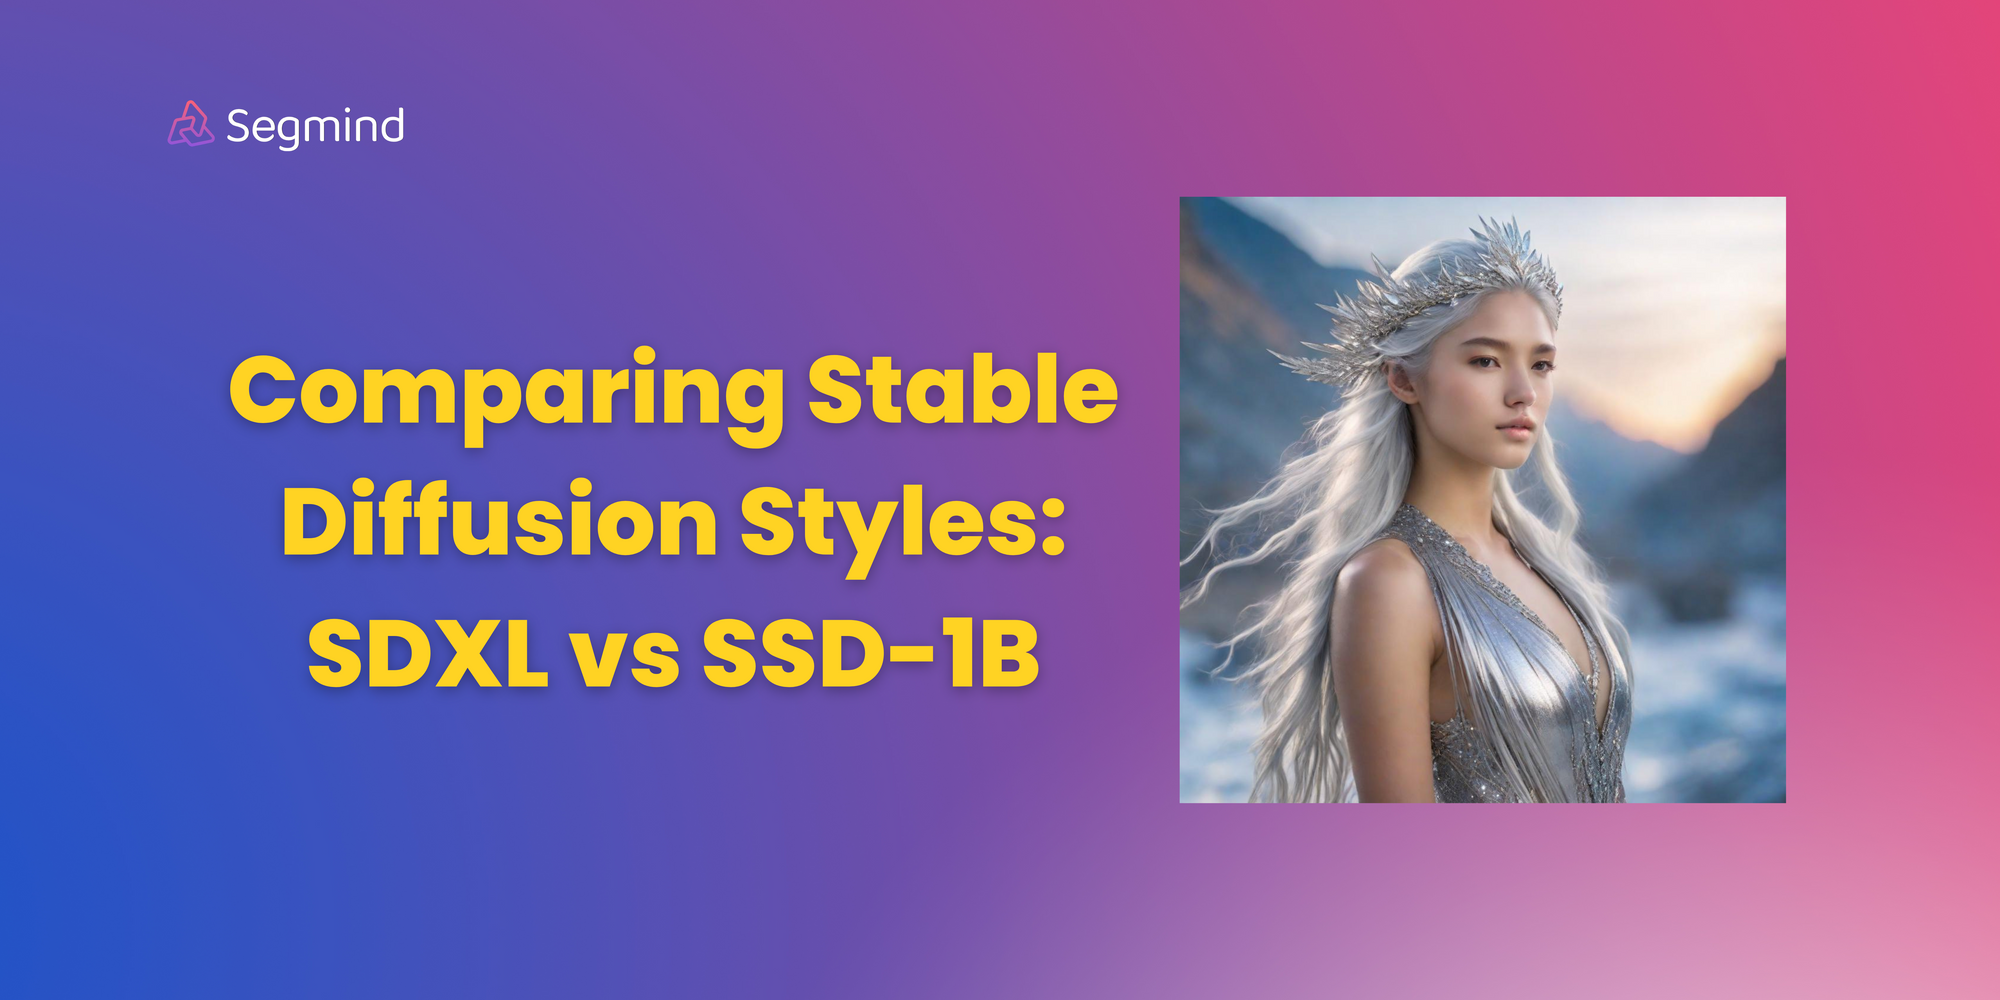 Comparing Stable Diffusion Styles: SDXL vs SSD-1B